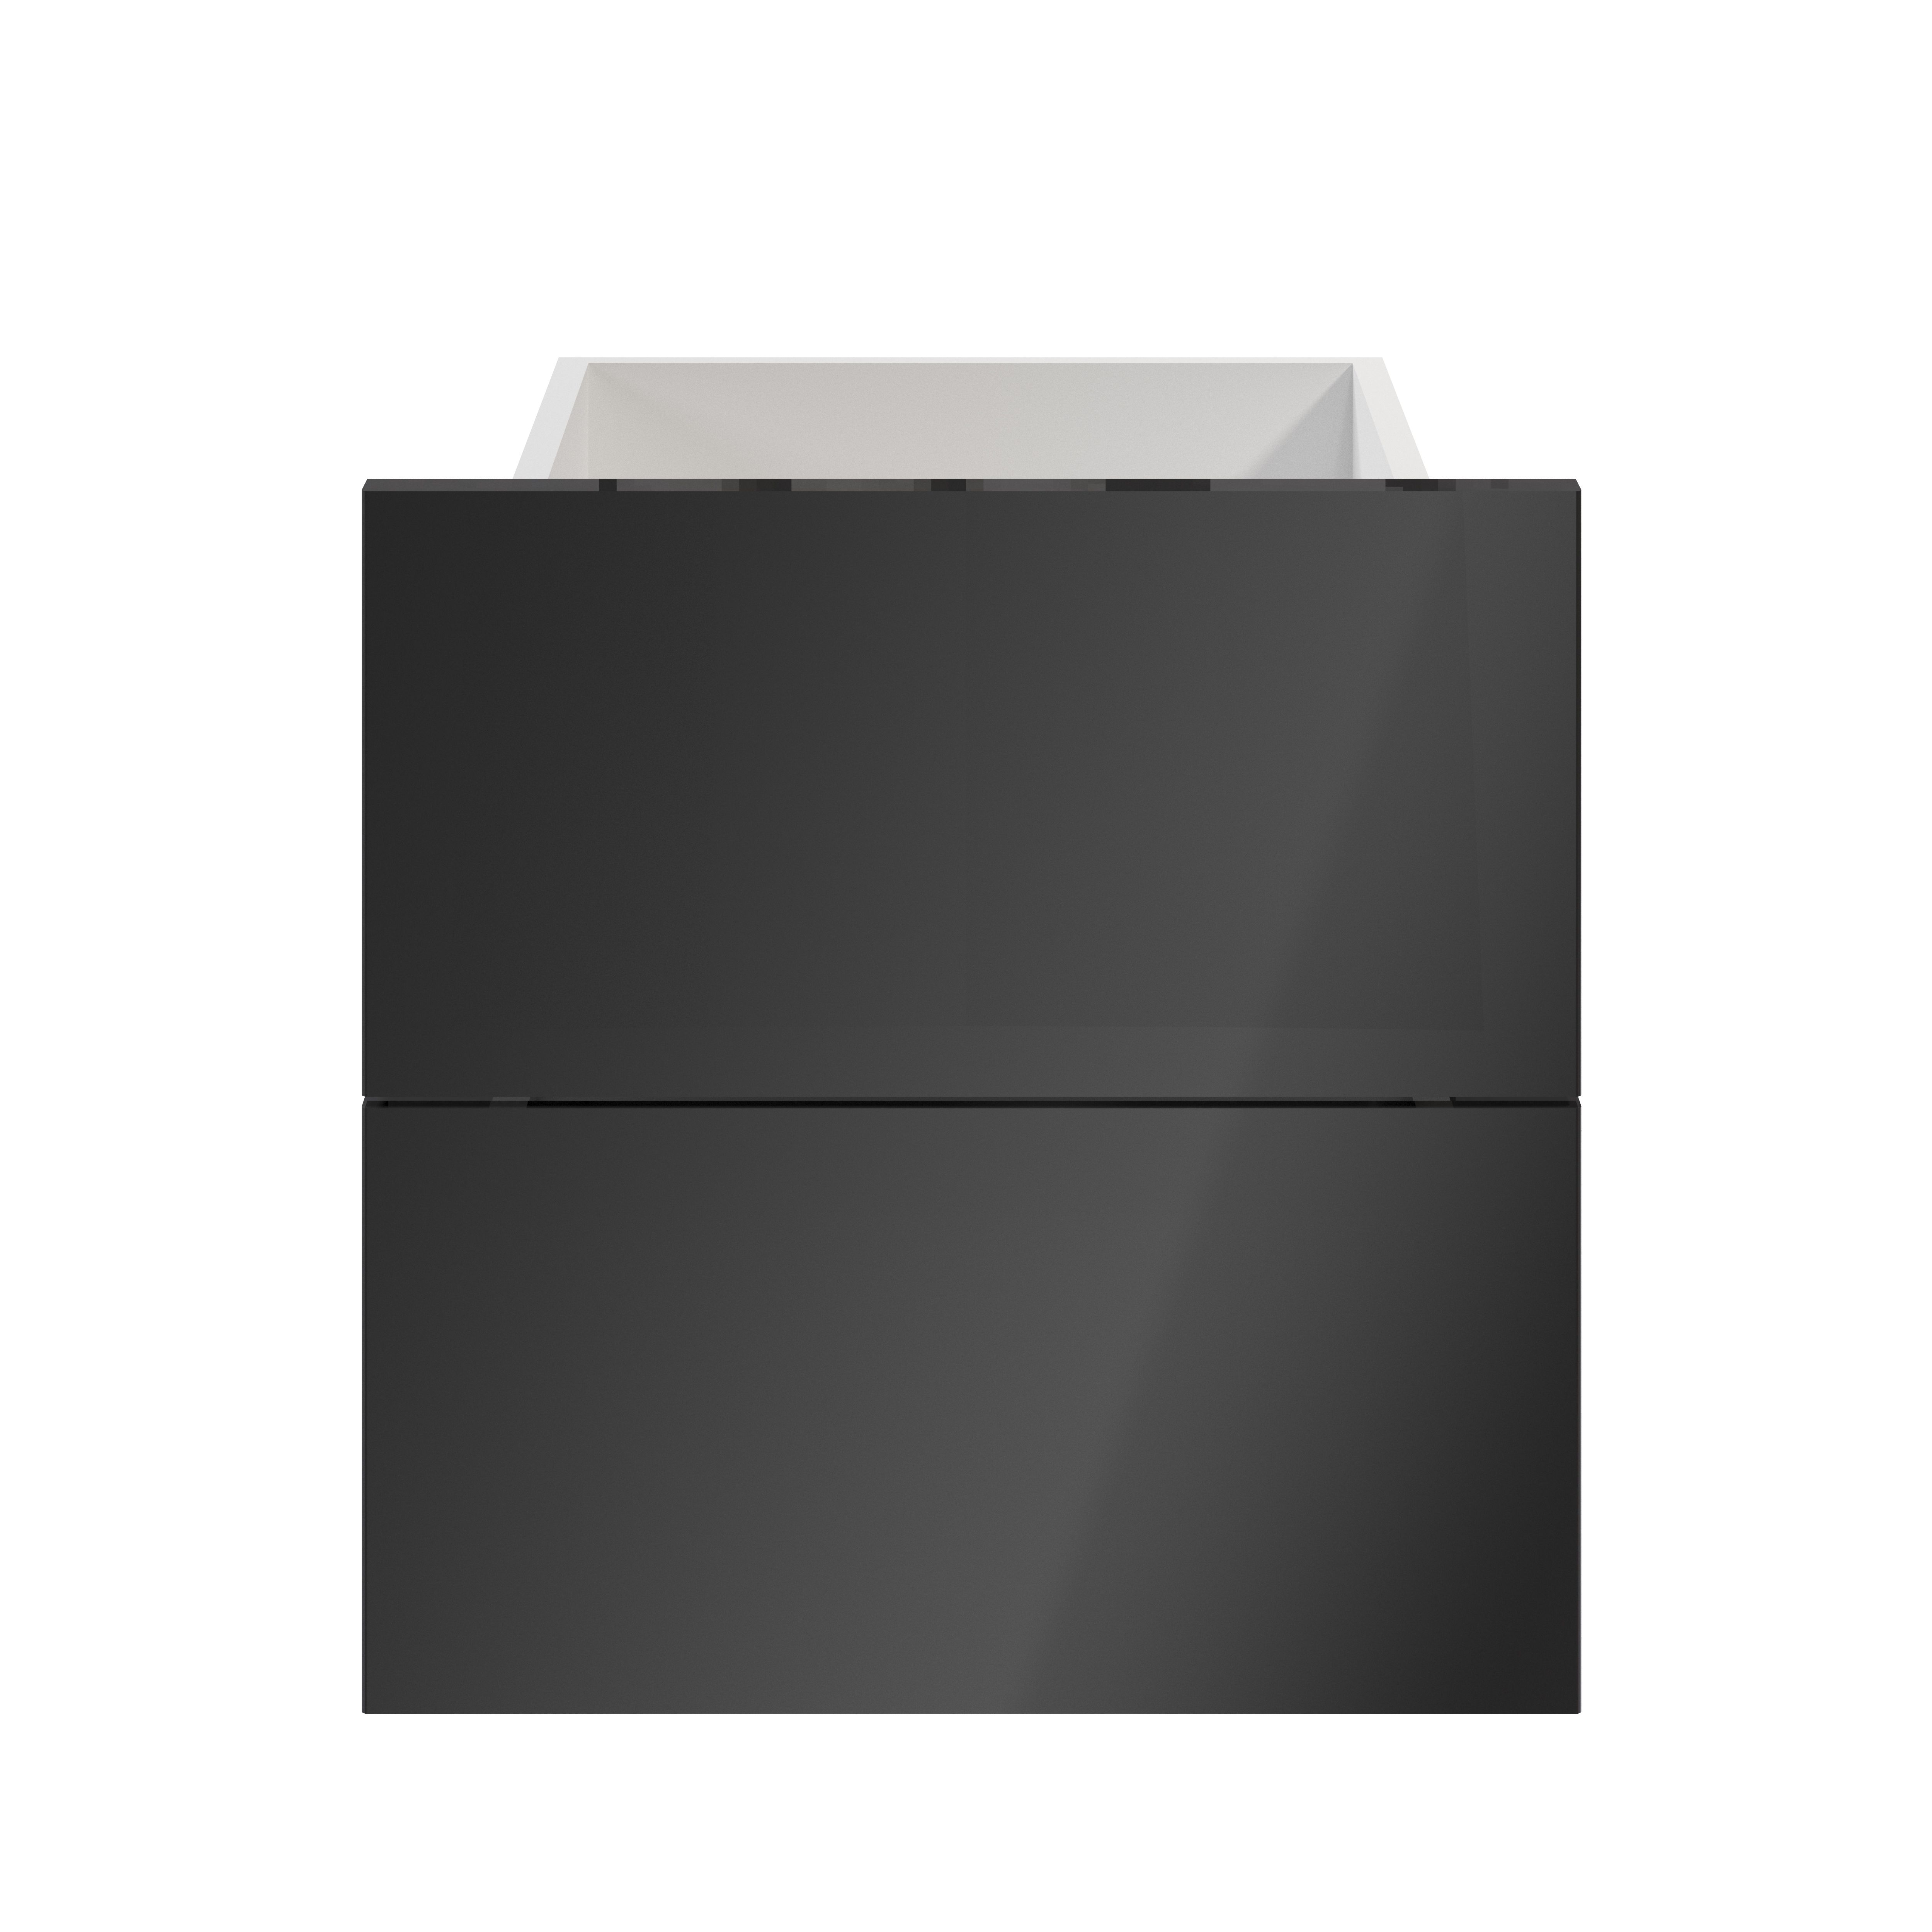 GoodHome Atomia Gloss anthracite Slab External Drawer (H)184.5mm (W)372mm (D)390mm, Set of 2